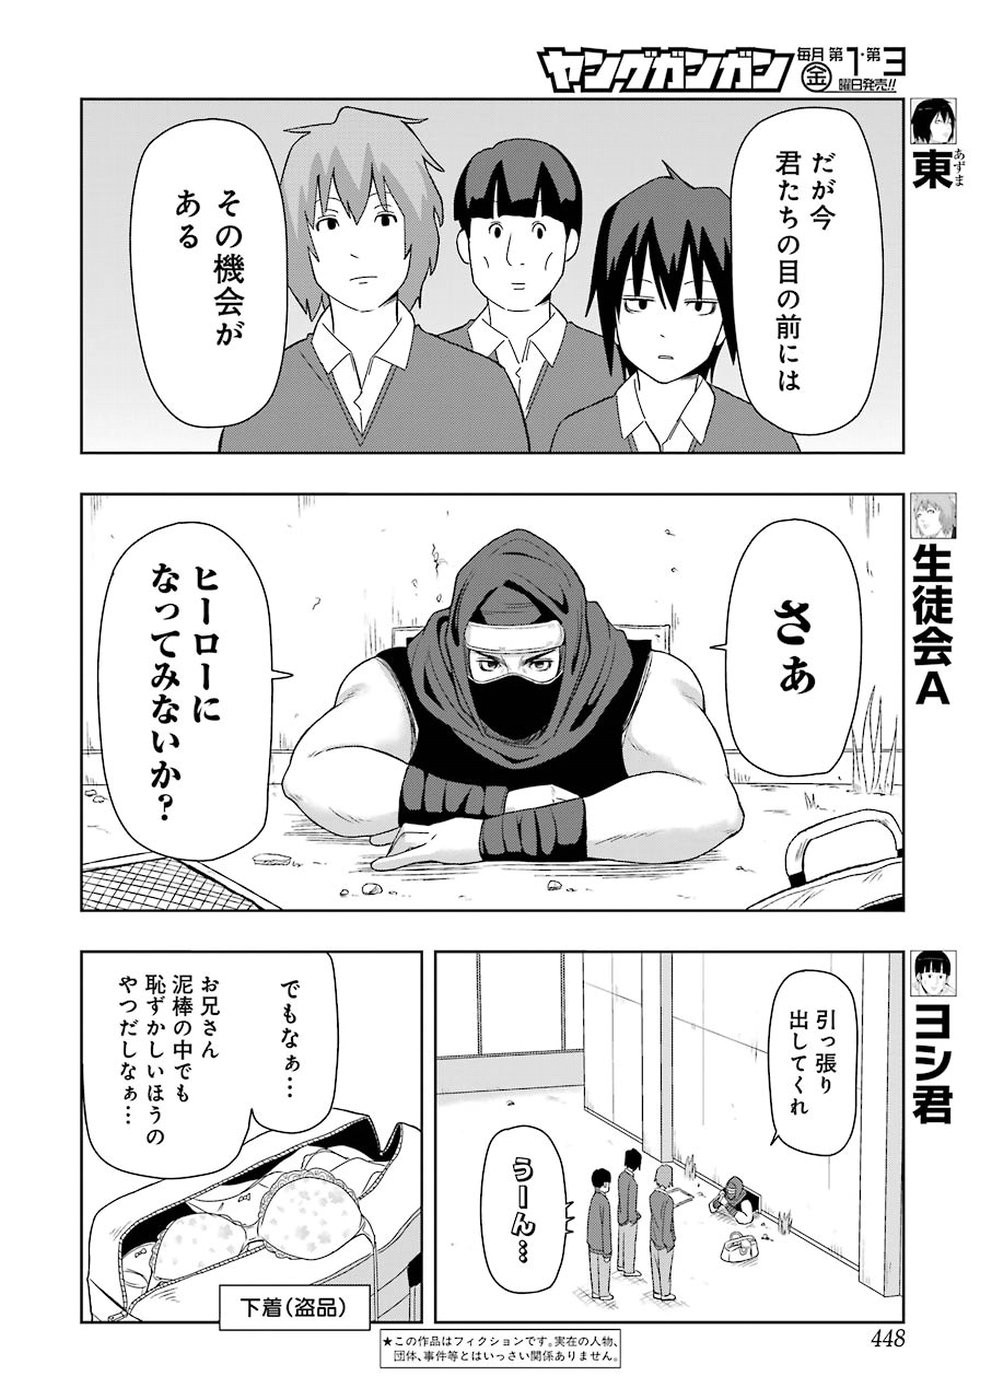 + Tic Nee-san - Chapter 144 - Page 2